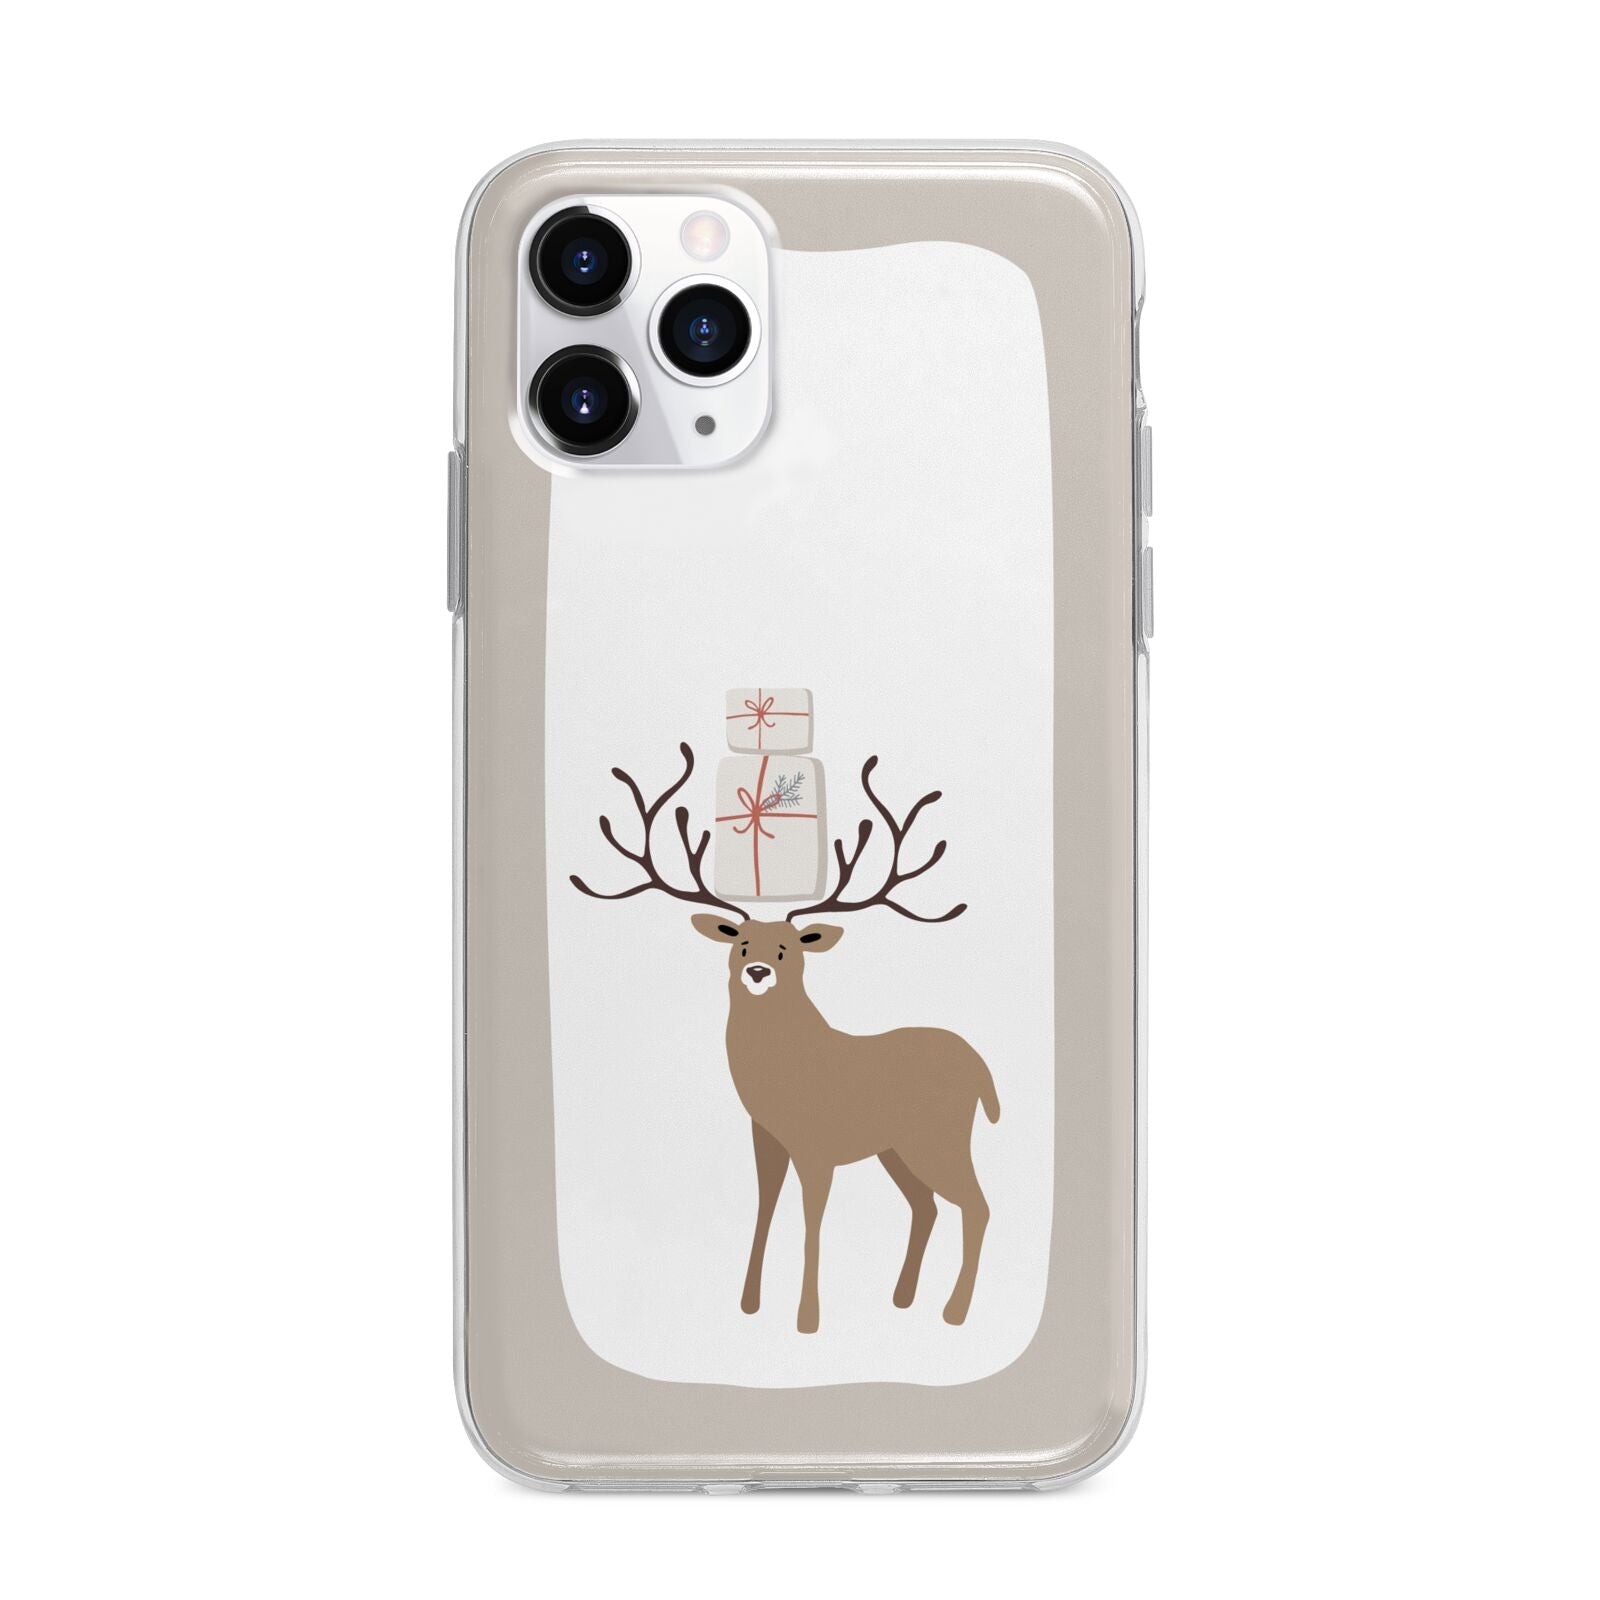 Reindeer Presents Apple iPhone 11 Pro Max in Silver with Bumper Case